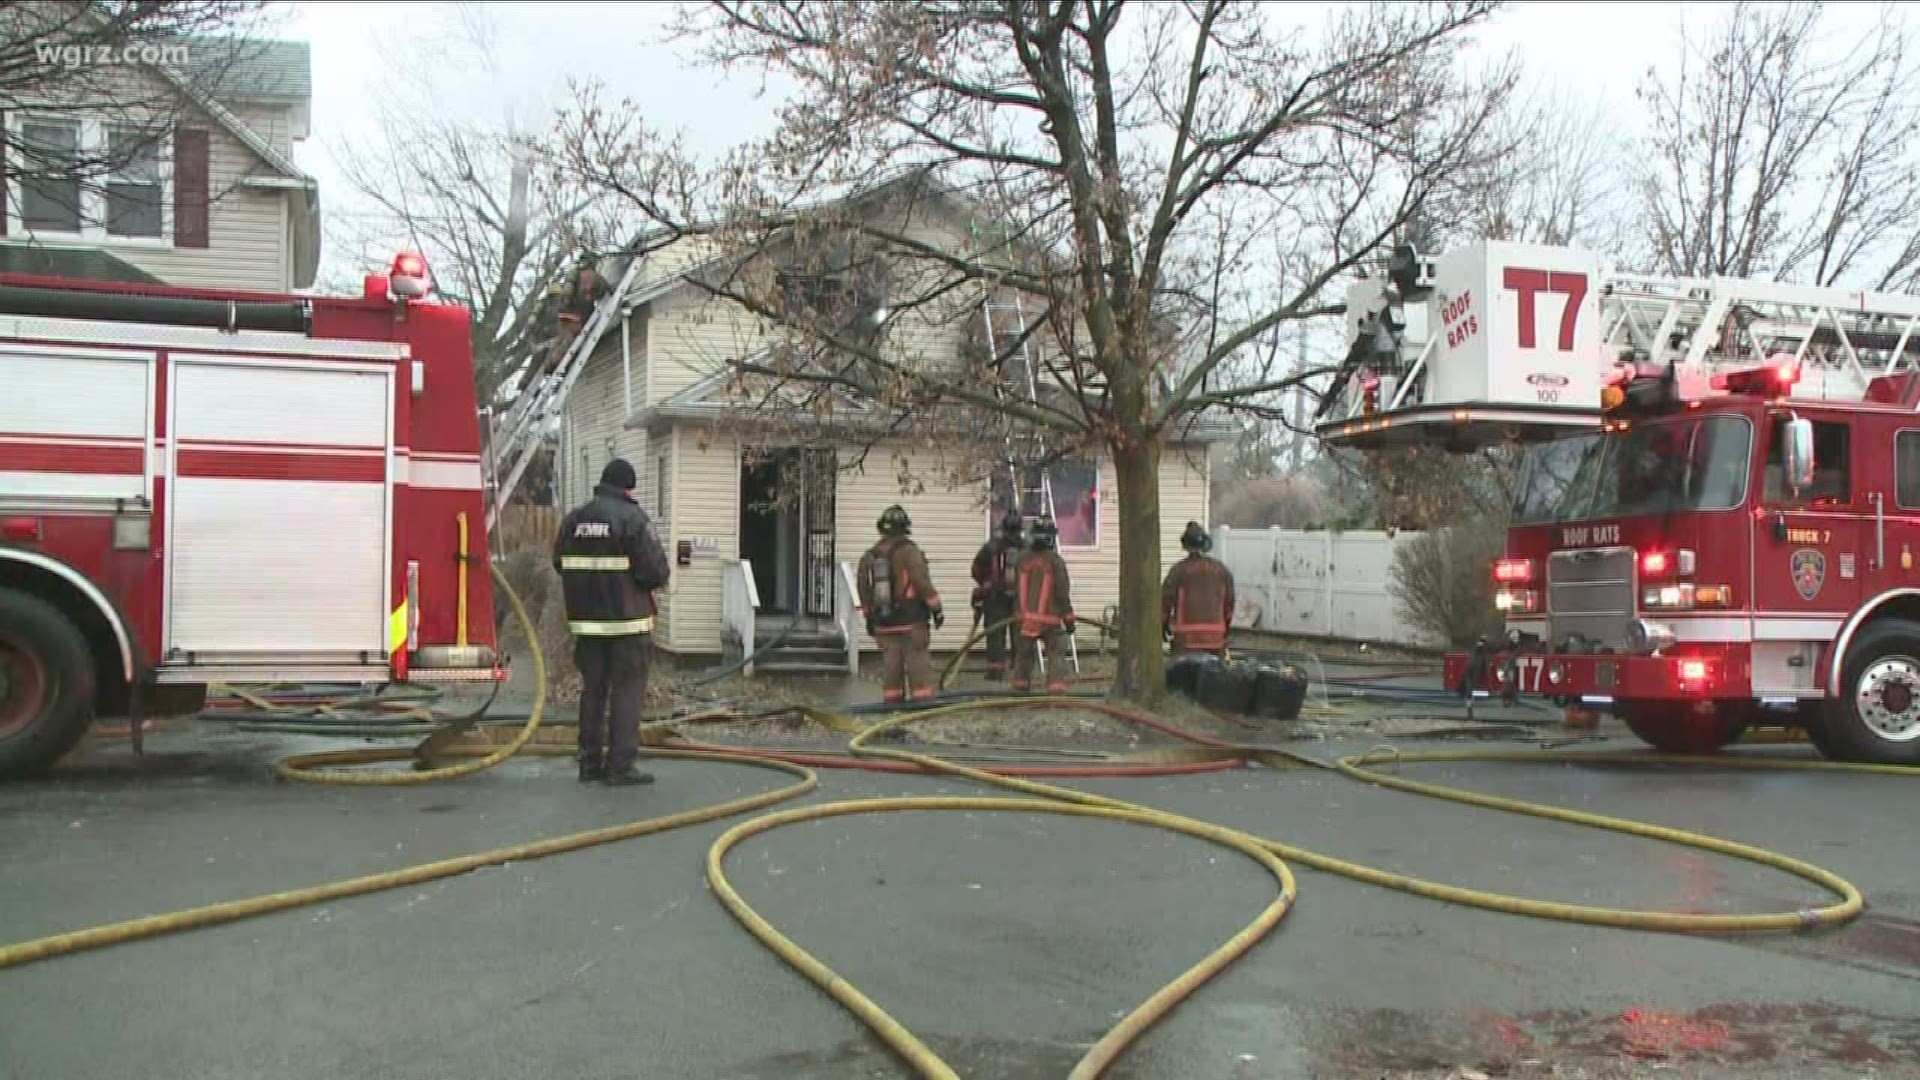 Five people lost almost everything after a house fire on LaSalle Ave. in Buffalo earlier today. Firefighters say the flames started on a lower floor.